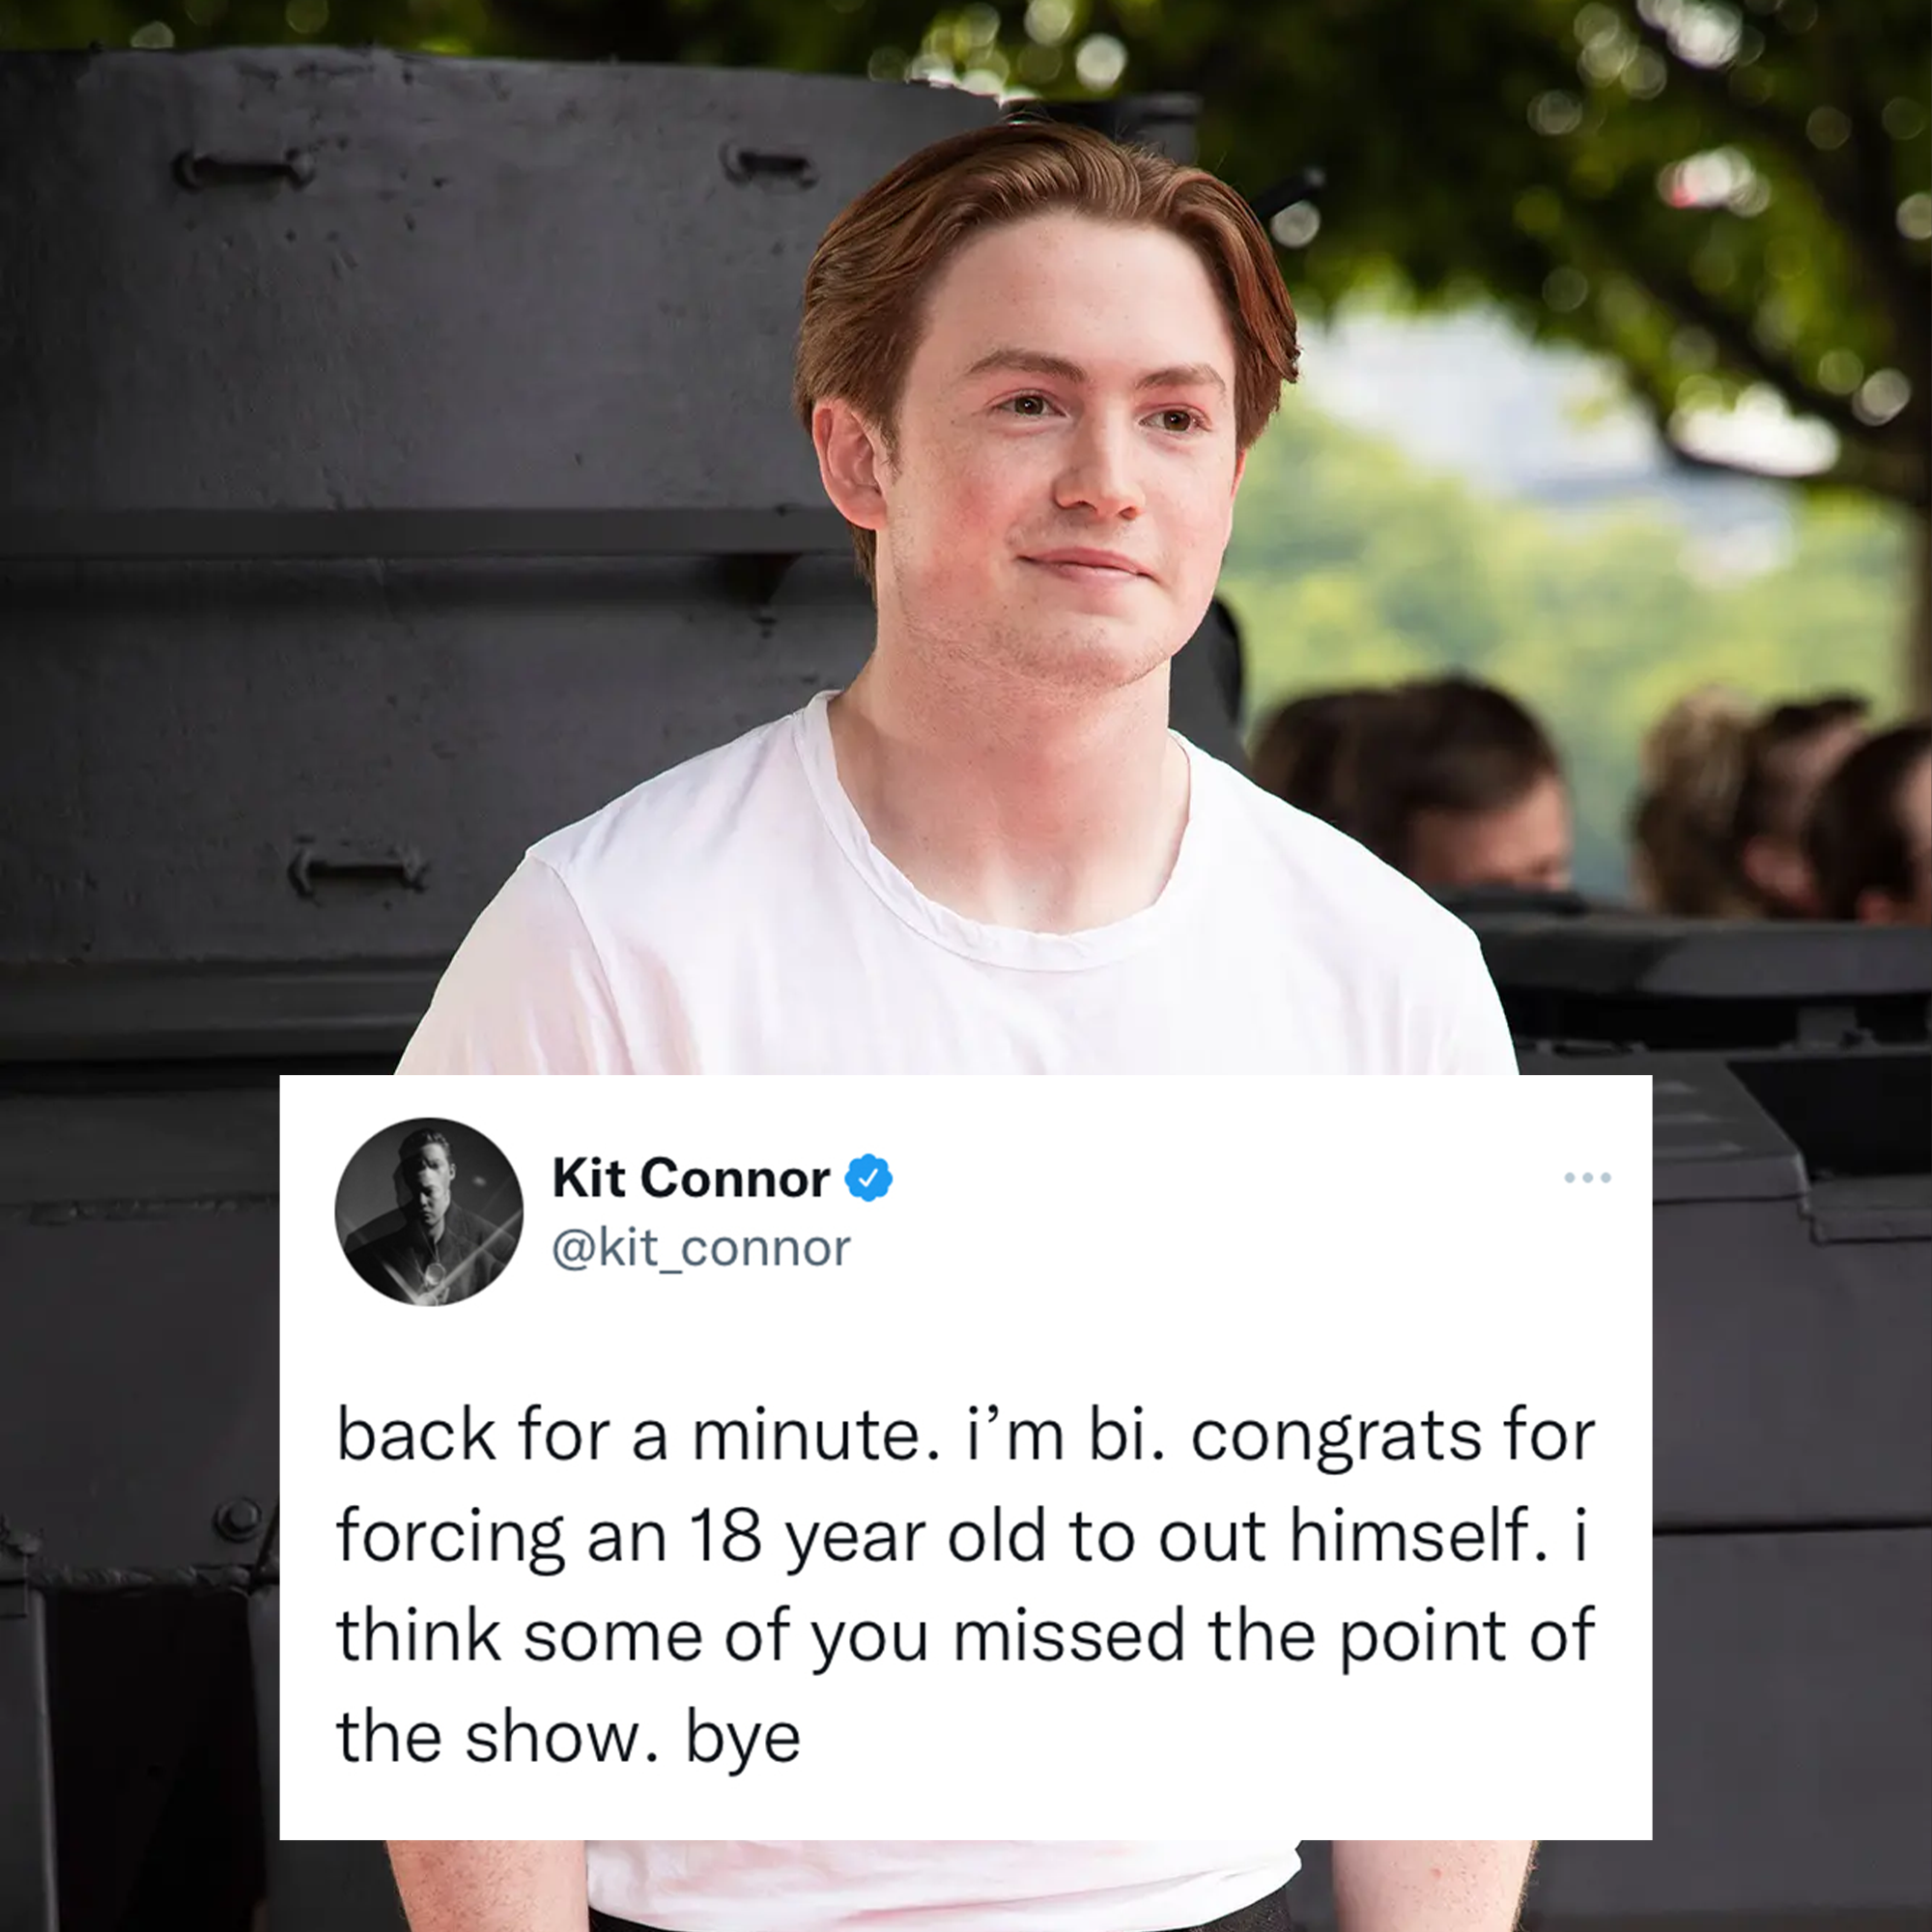 photo of Kit Conner overlaid with his tweet reading "back for a minute. i'm bi. congrats for forcing an 18 year old to out himself. i think some of you missed the point of the show. bye"